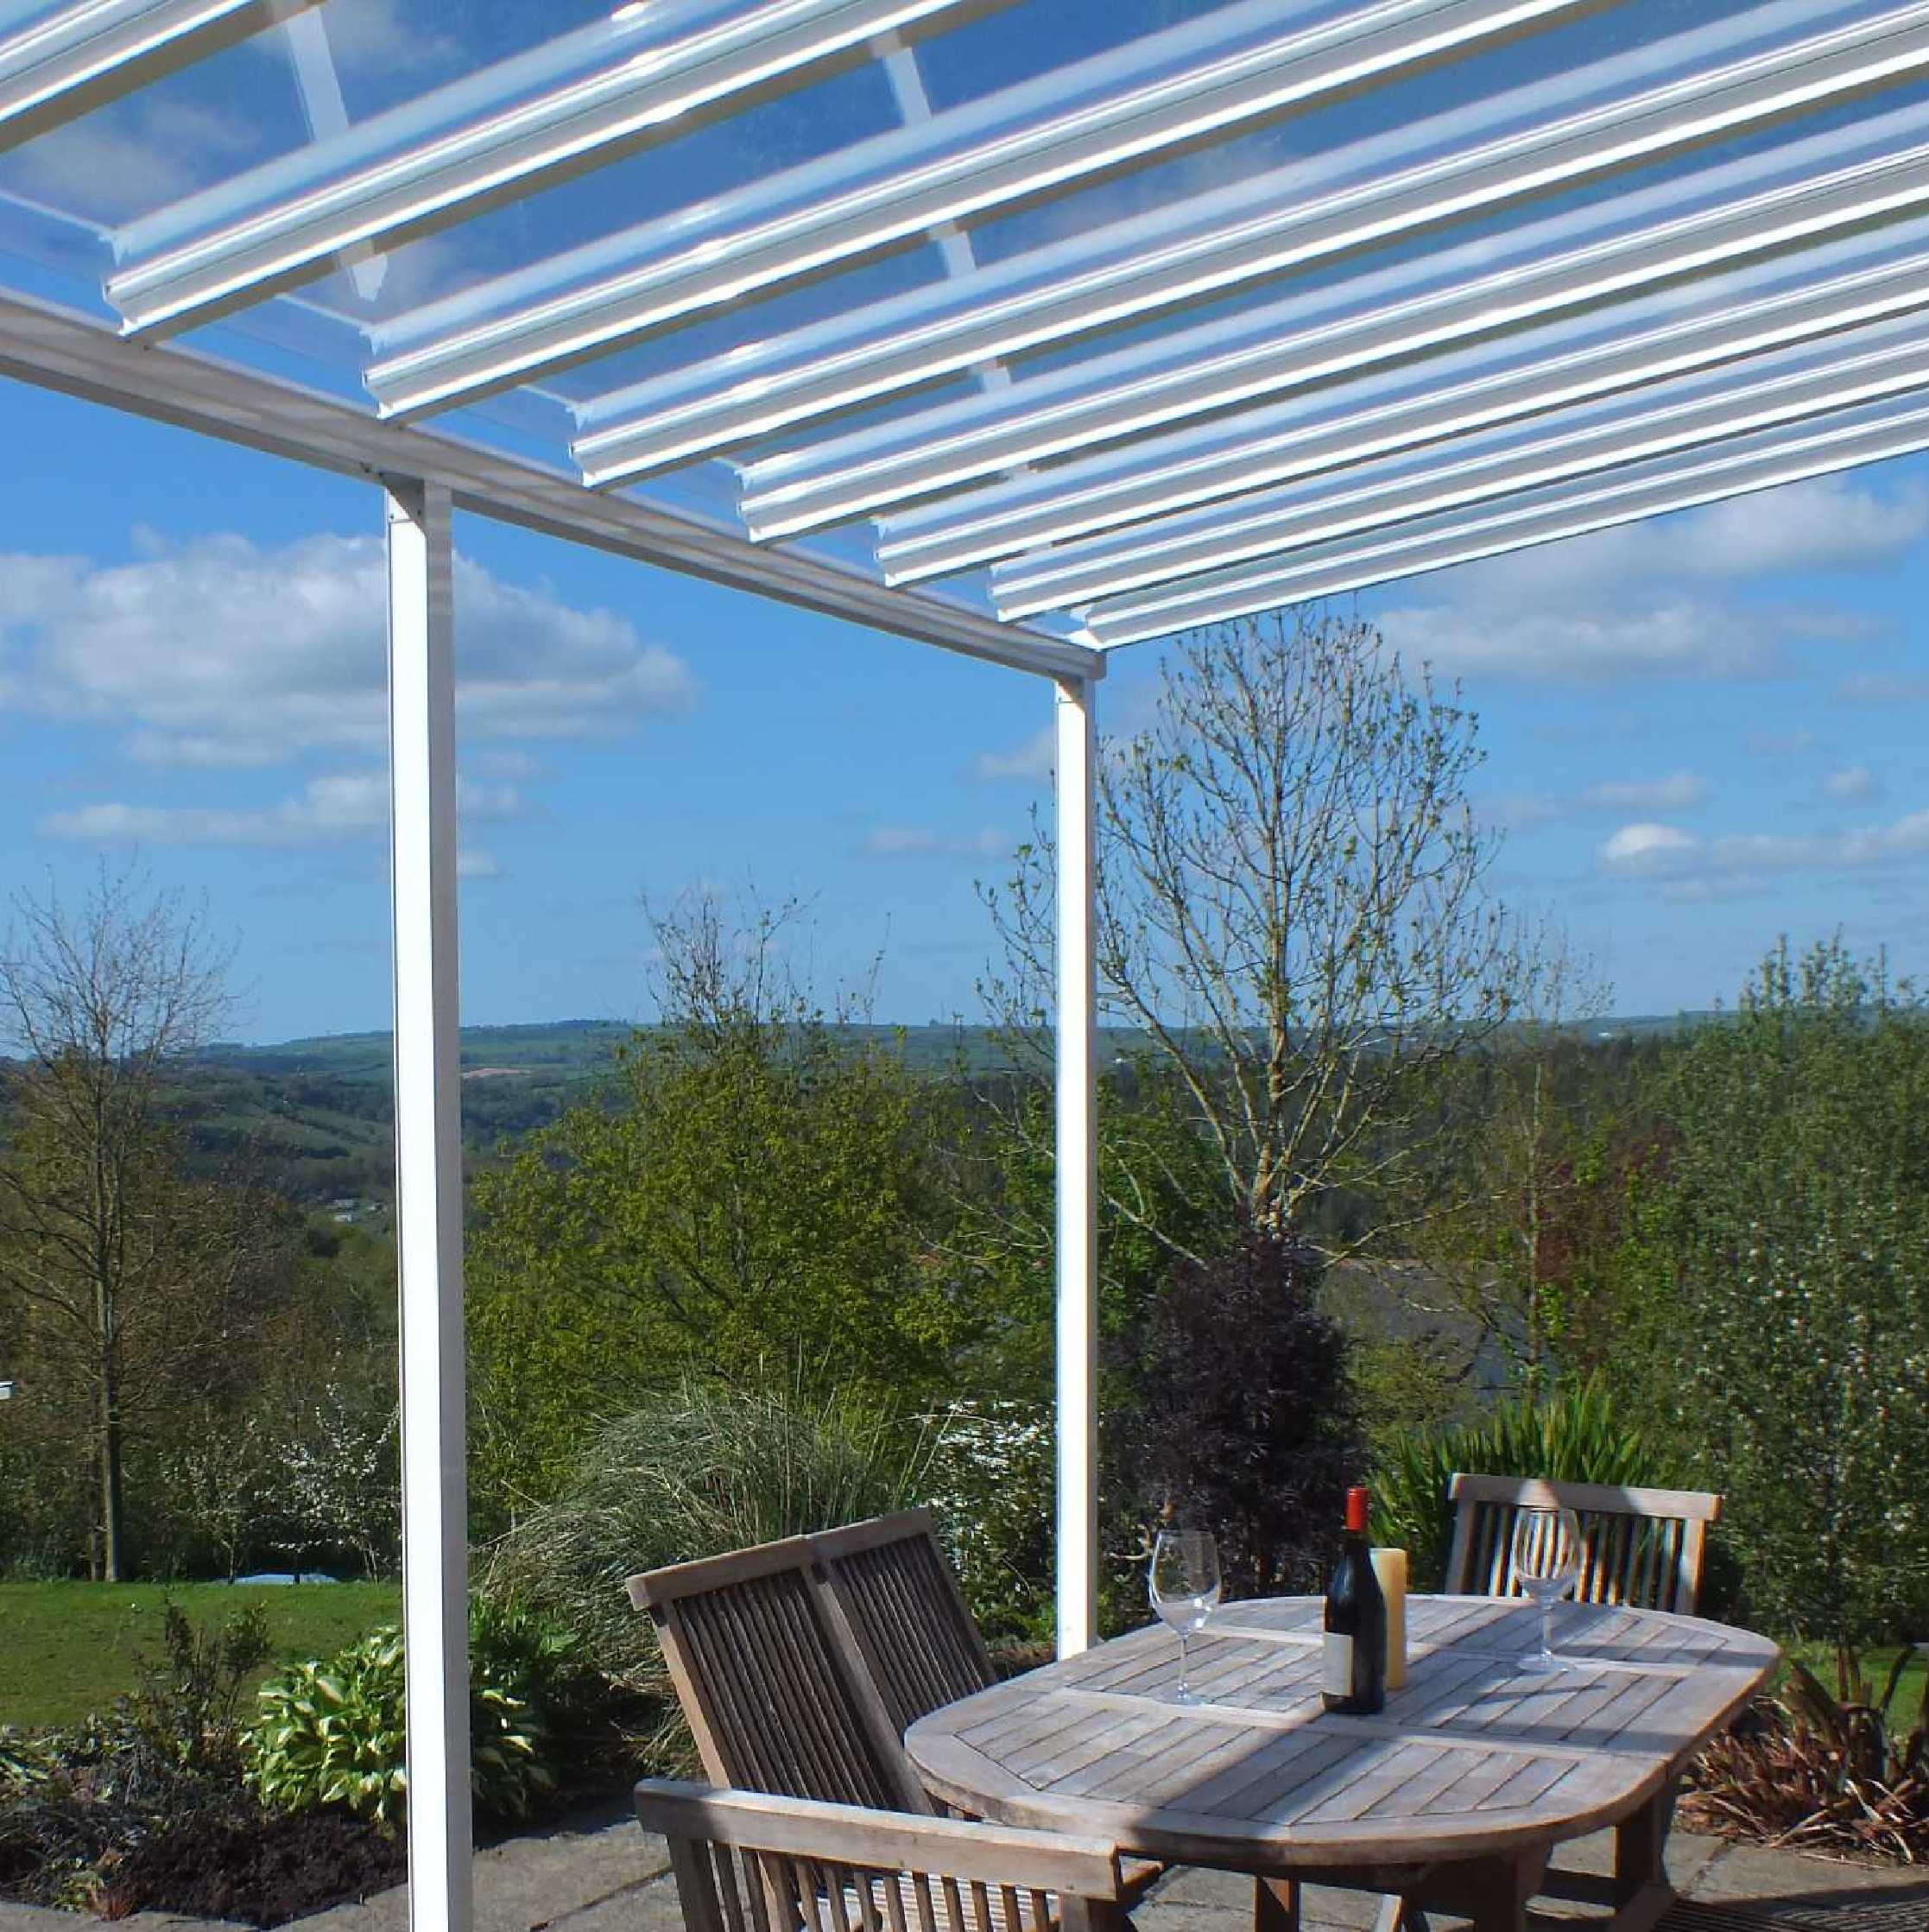 Buy Omega Smart Lean-To Canopy, White with 6mm Glass Clear Plate Polycarbonate Glazing - 10.0m (W) x 4.0m (P), (5) Supporting Posts online today